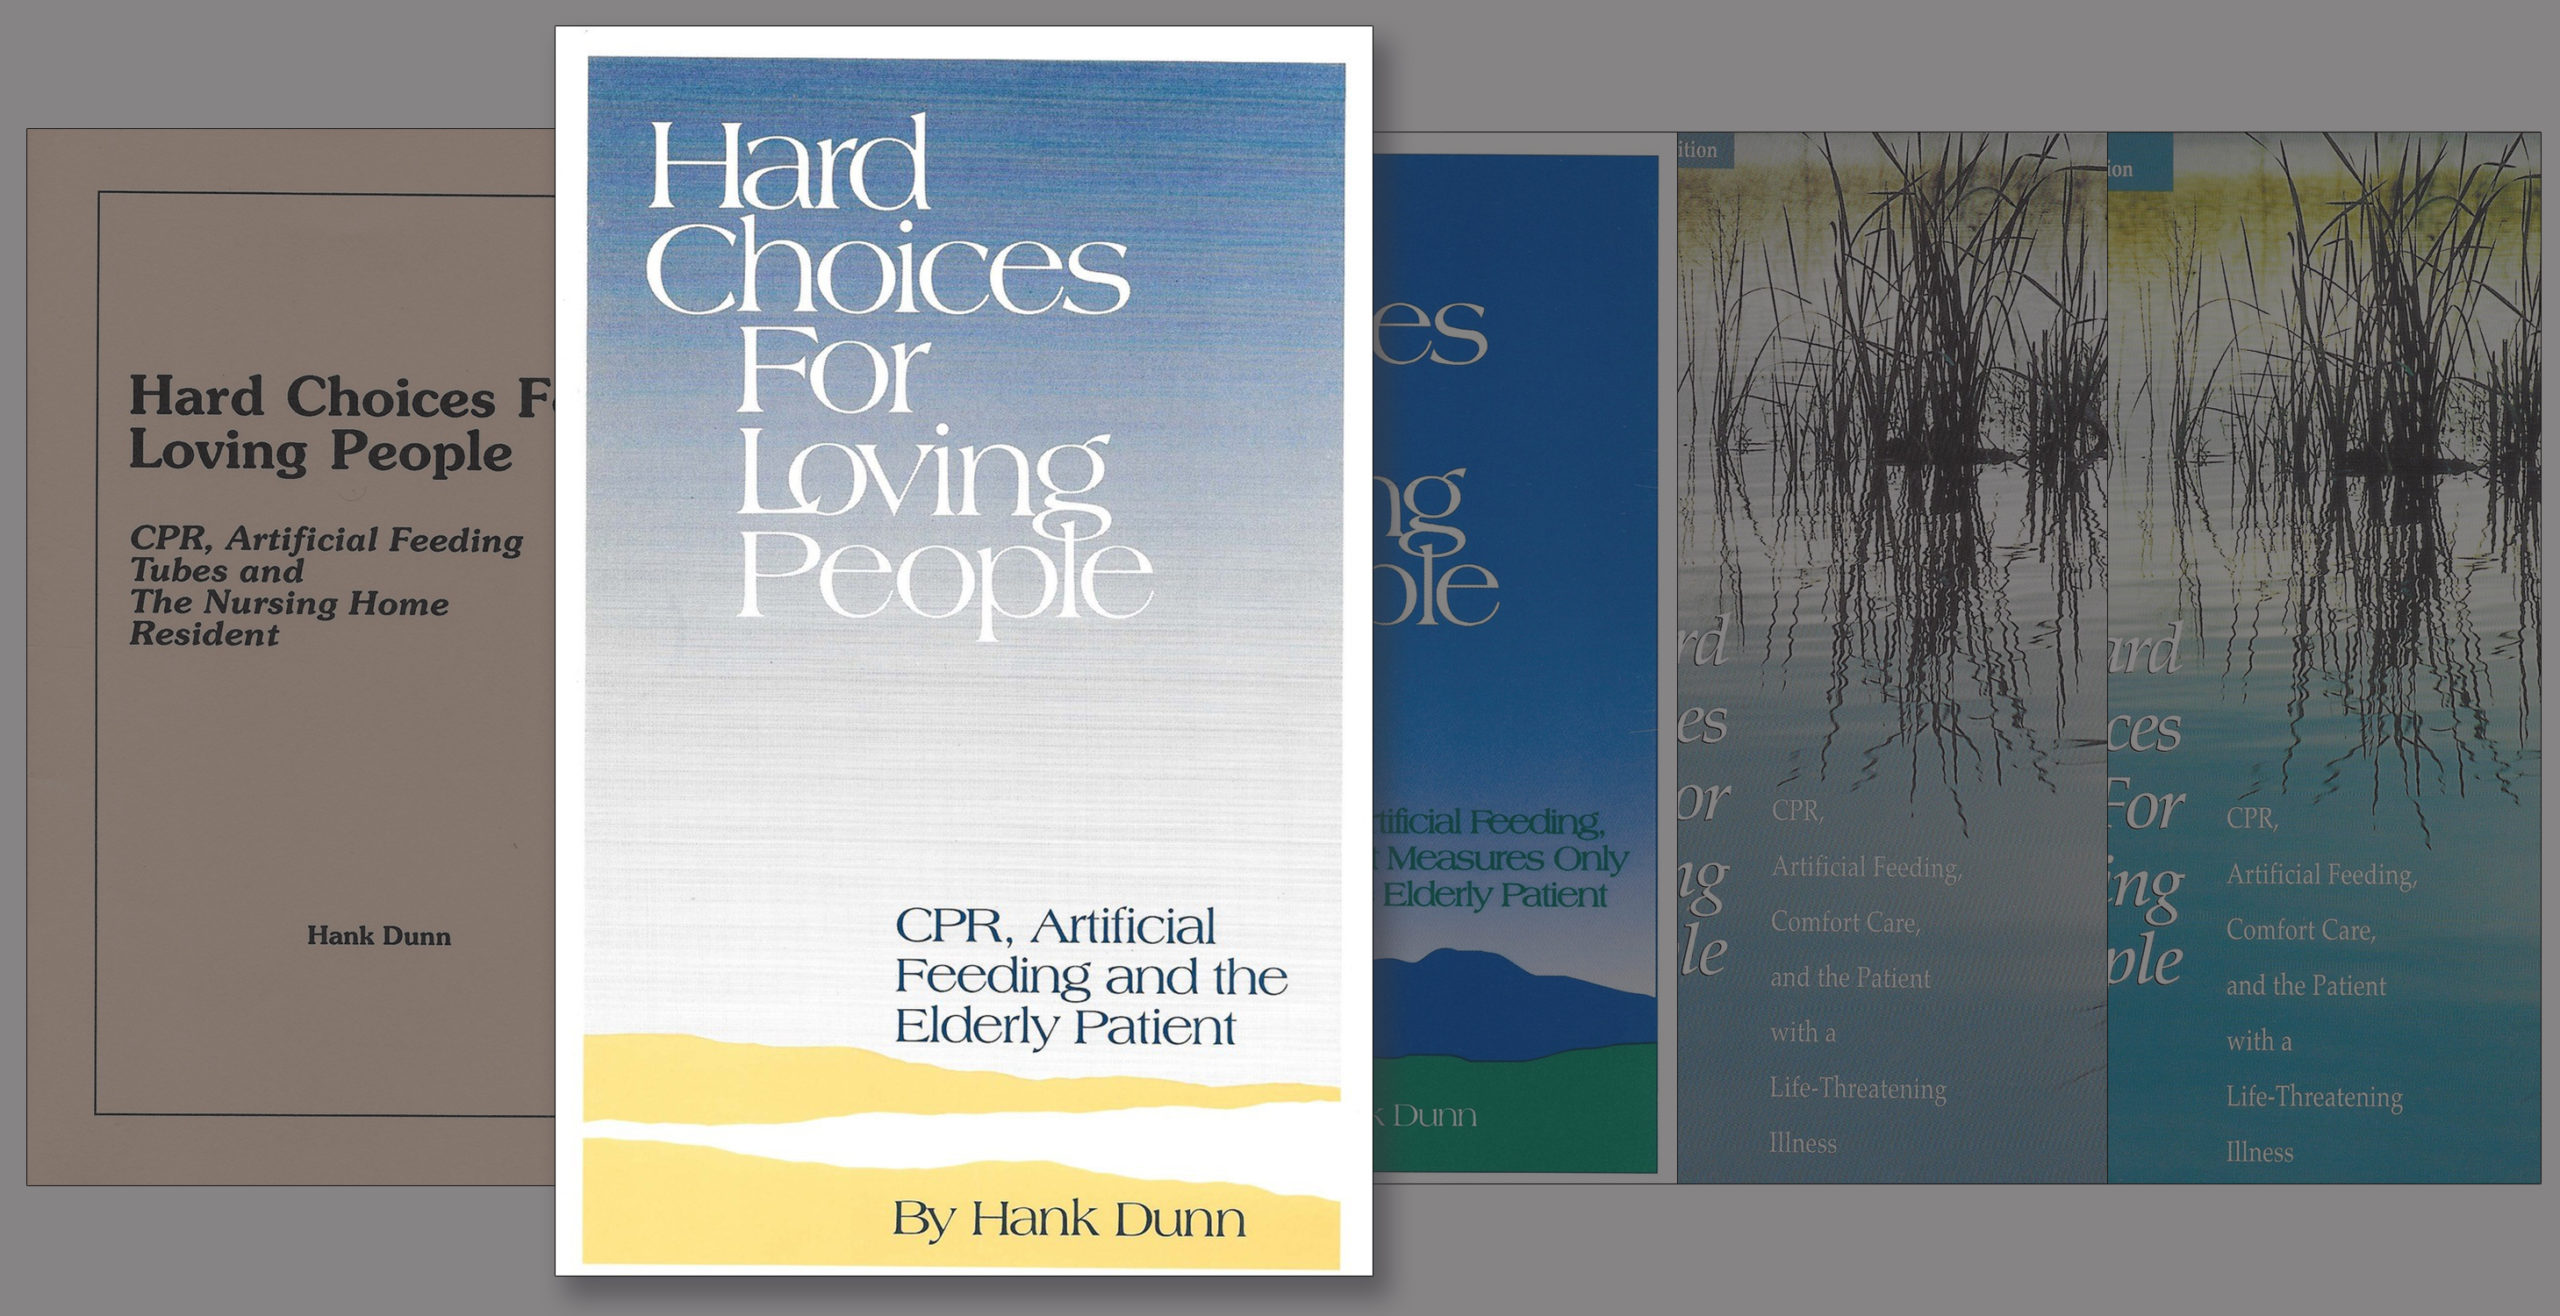 Hard Choices for Loving people, 1nd edition